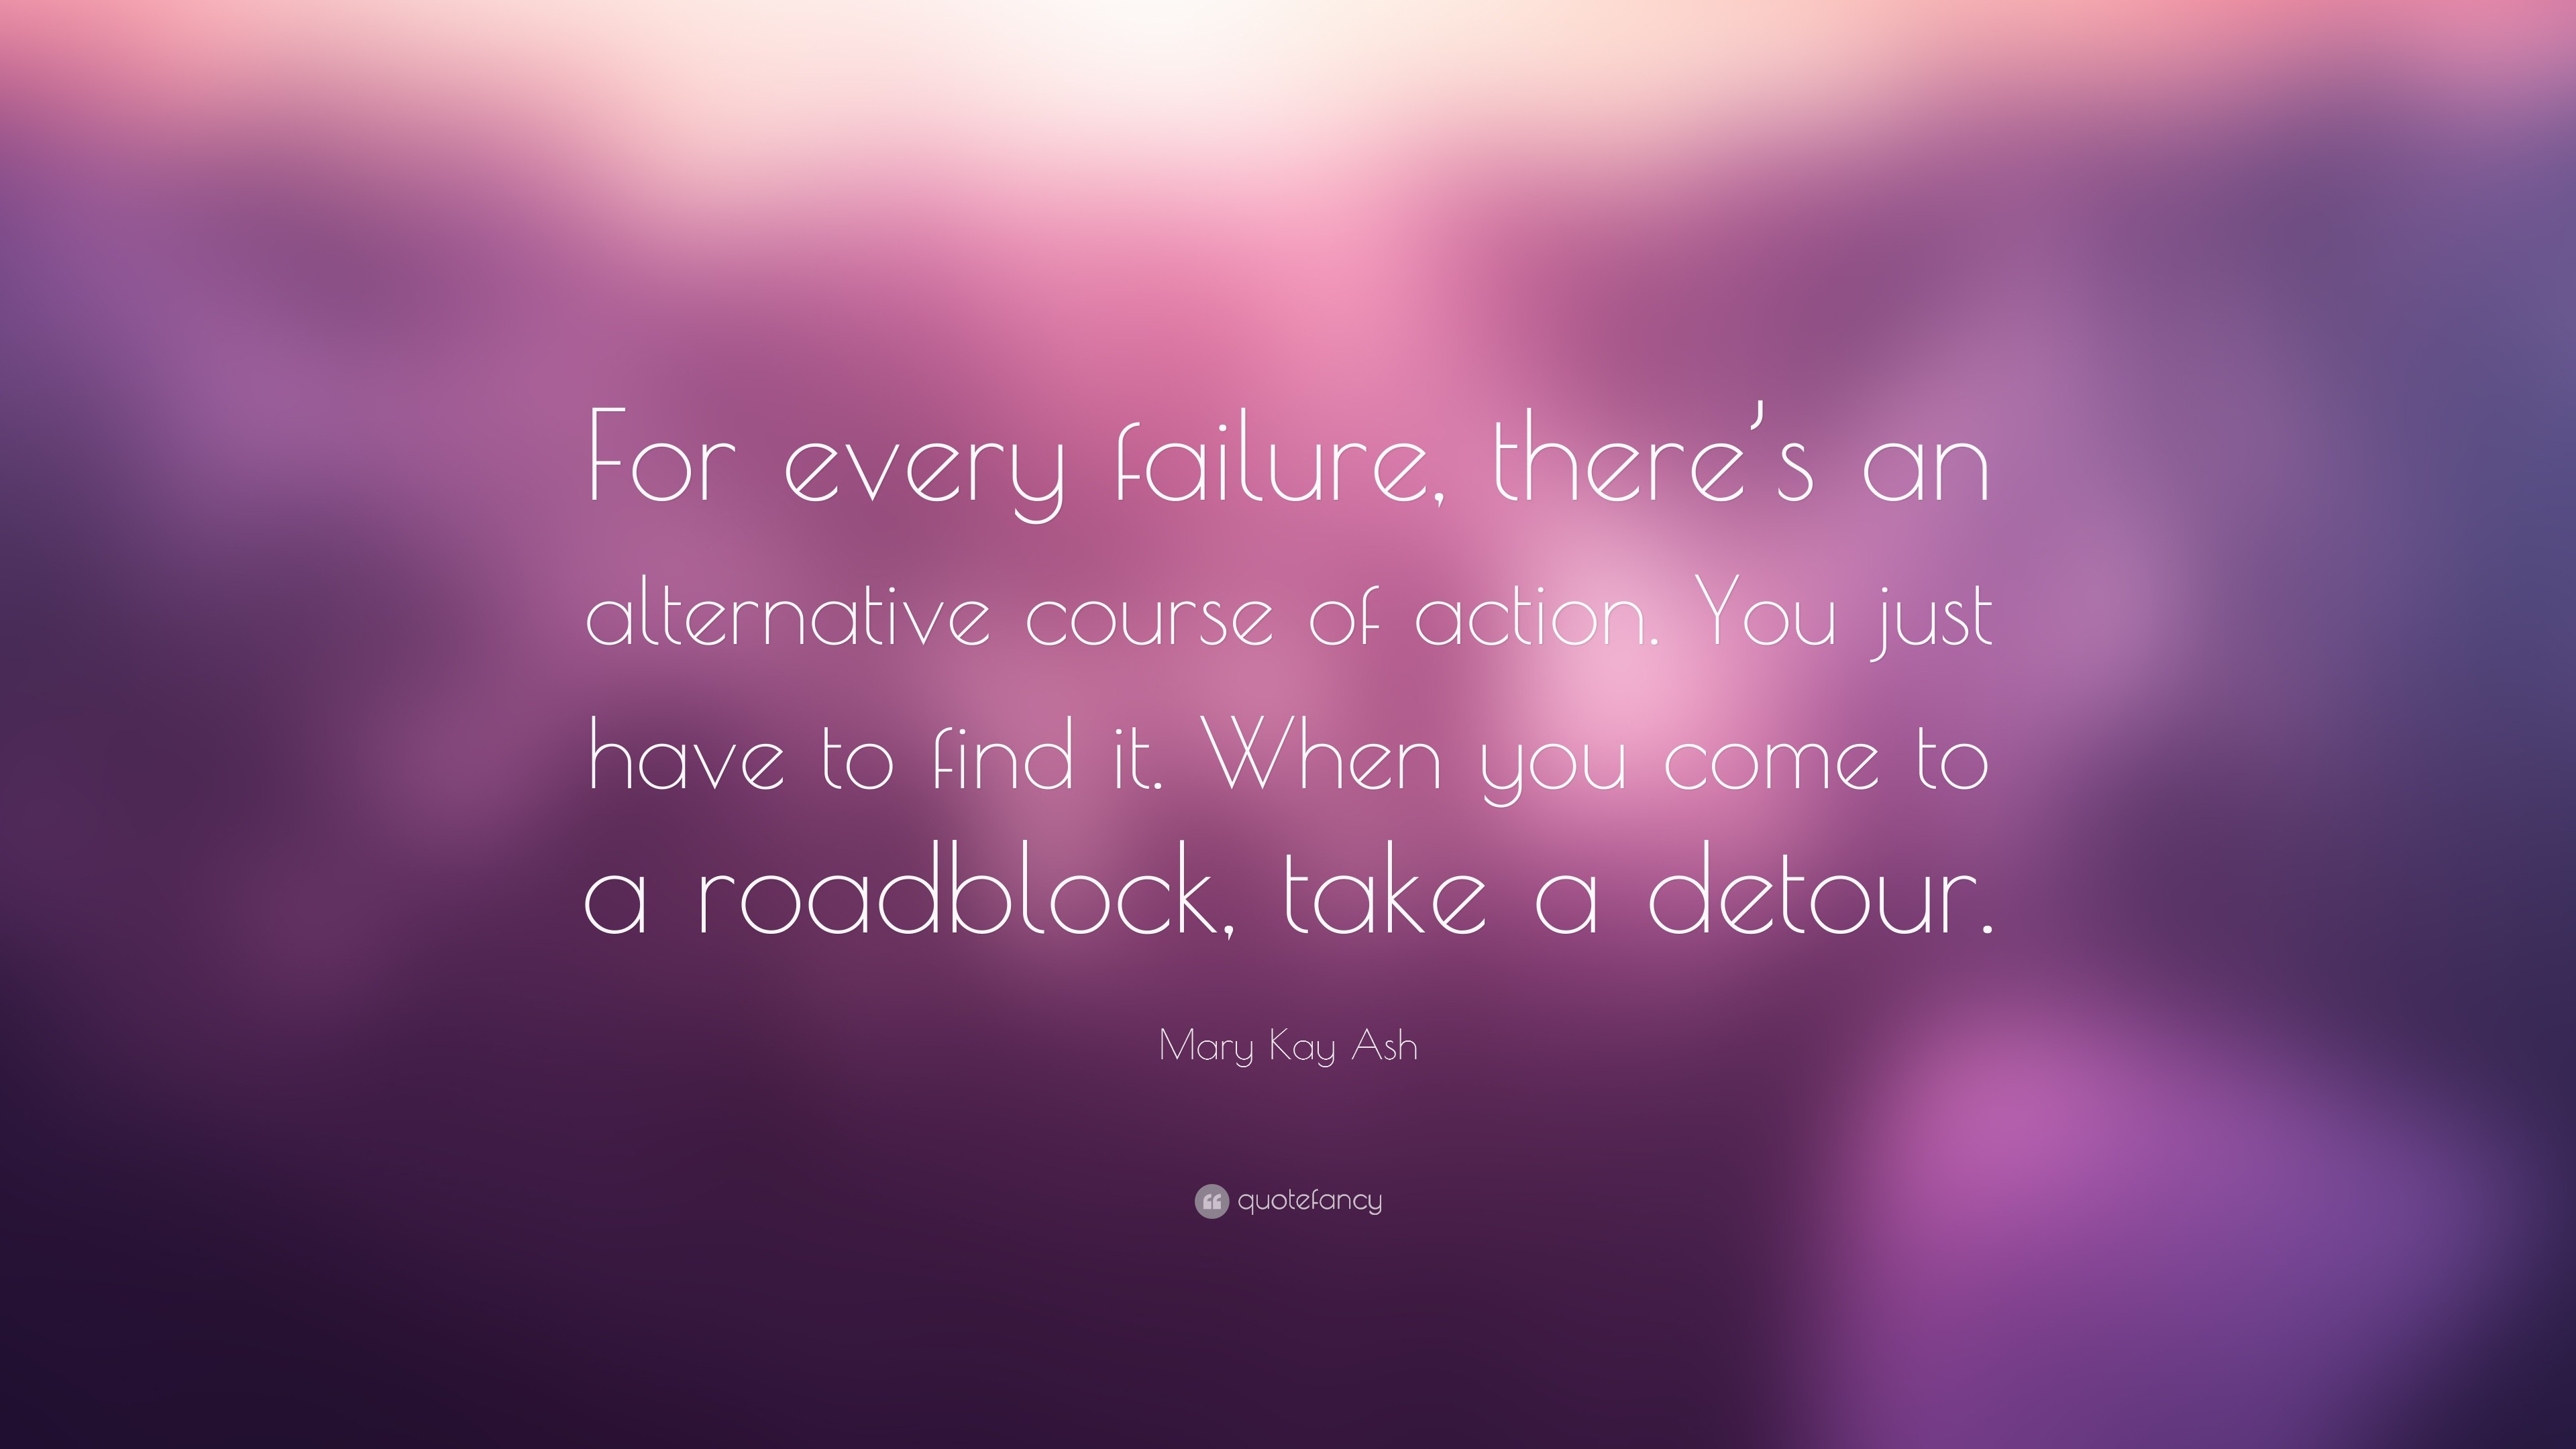 3840x2160 Mary Kay Ash Quote: “For every failure, there's an alternative course of  action